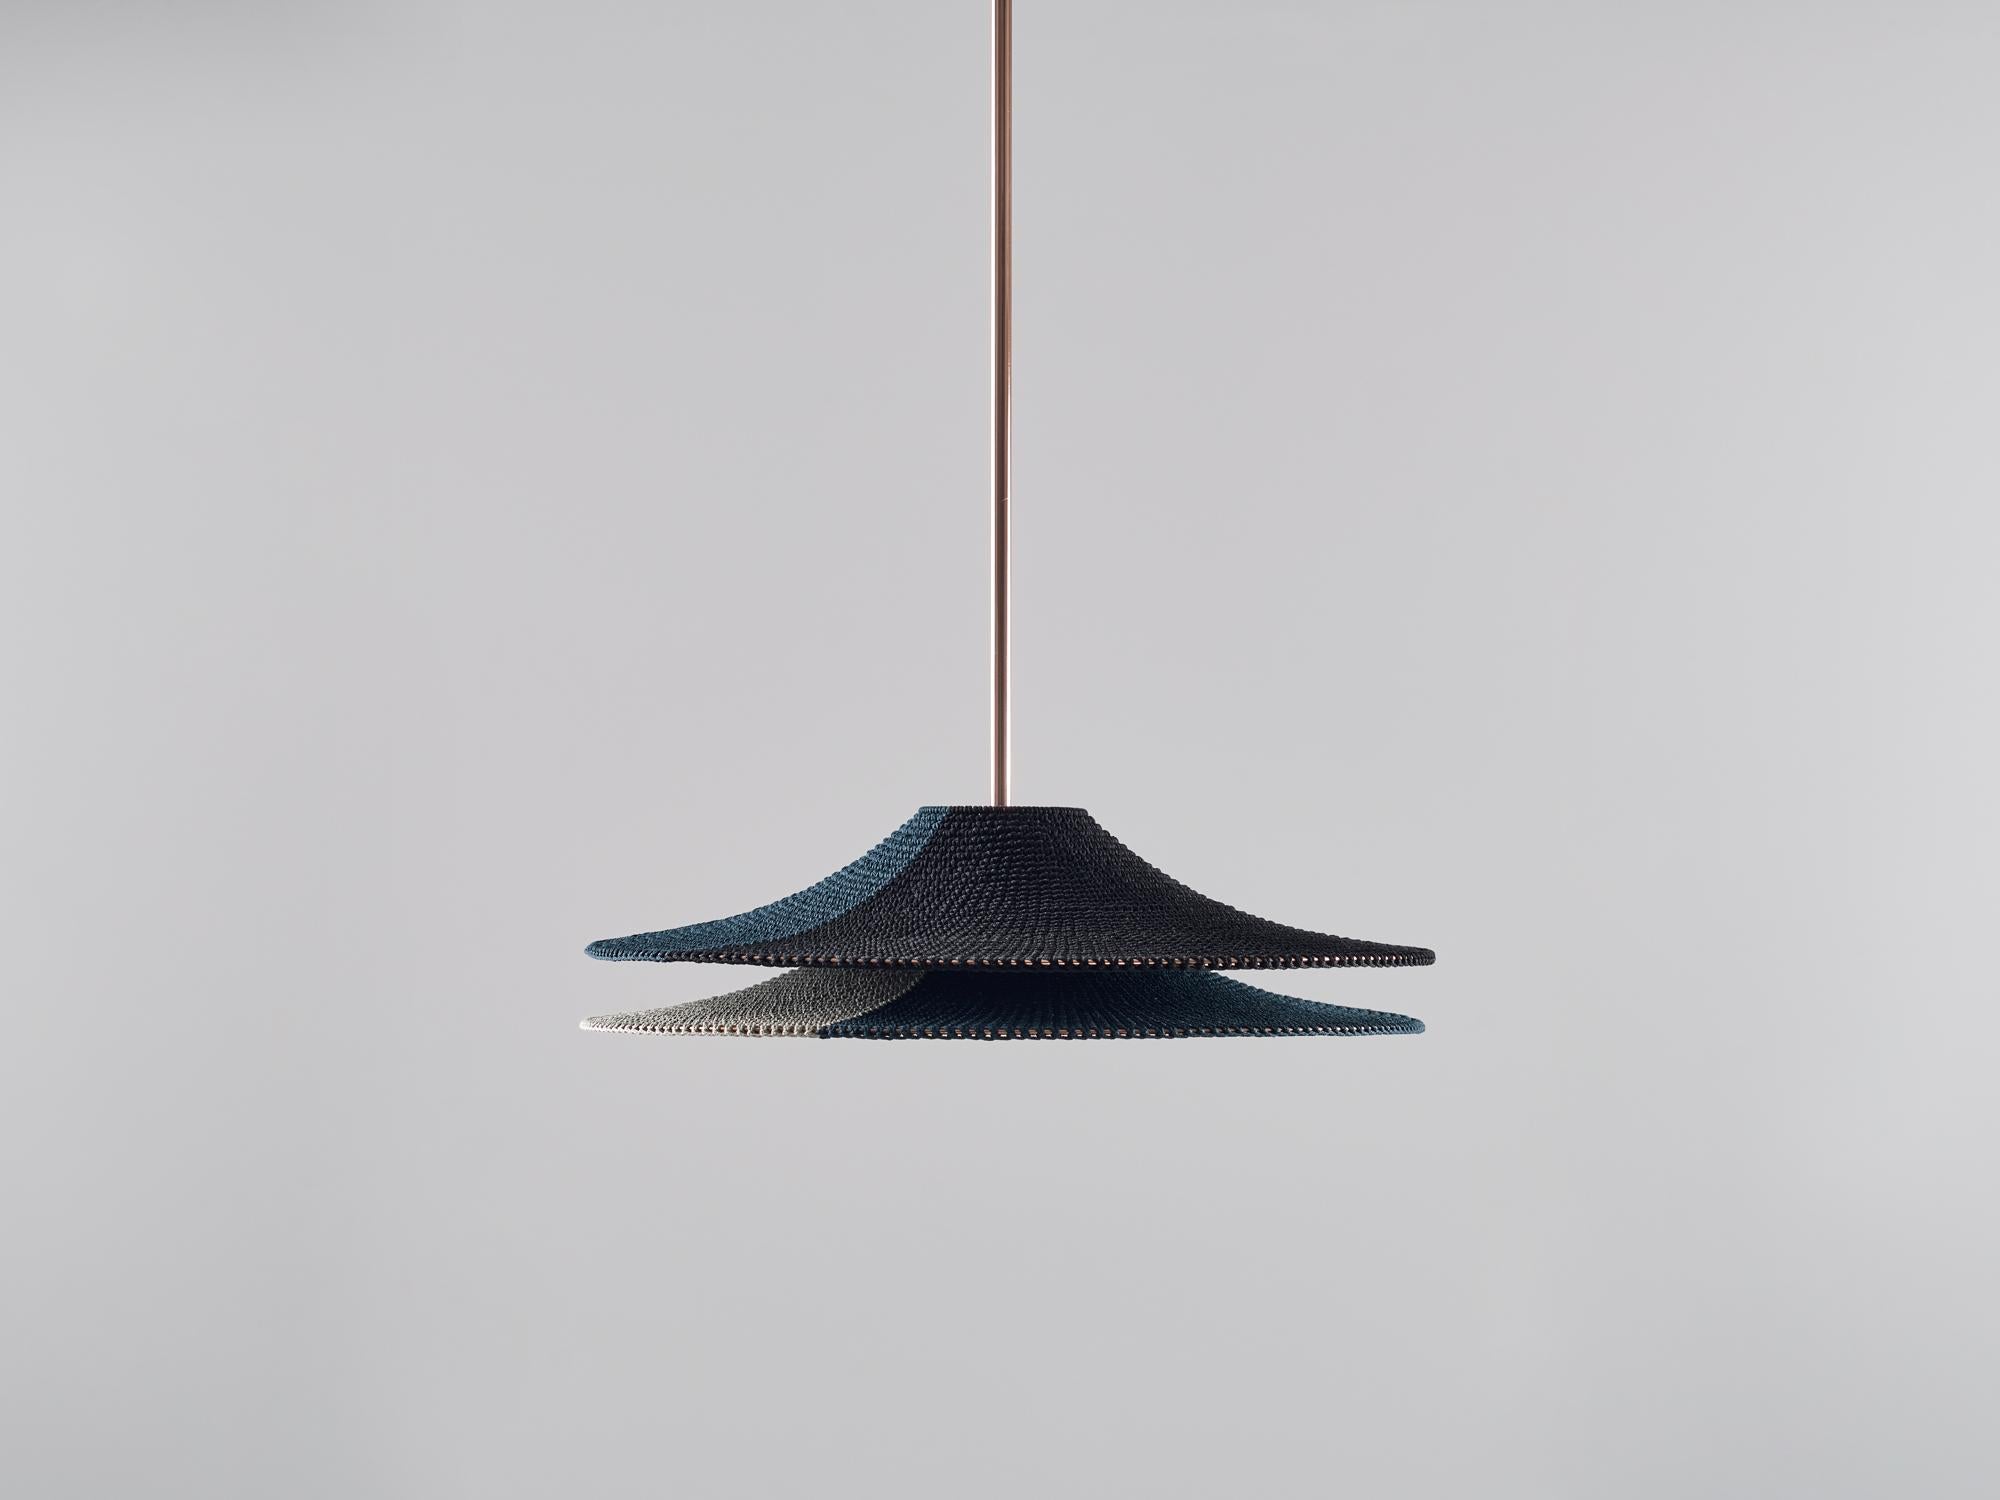 Small Simple Shade 02 50/50 Pendant Lamp by Naomi Paul
Dimensions: D 50 x H 14 cm
Materials: Metal frame, Egyptian cotton cord.
Colors: Black and Deepsea, Deepsea and Putty.
Available in other colors and in 3 sizes: D50, D60, D80 cm.
Available in